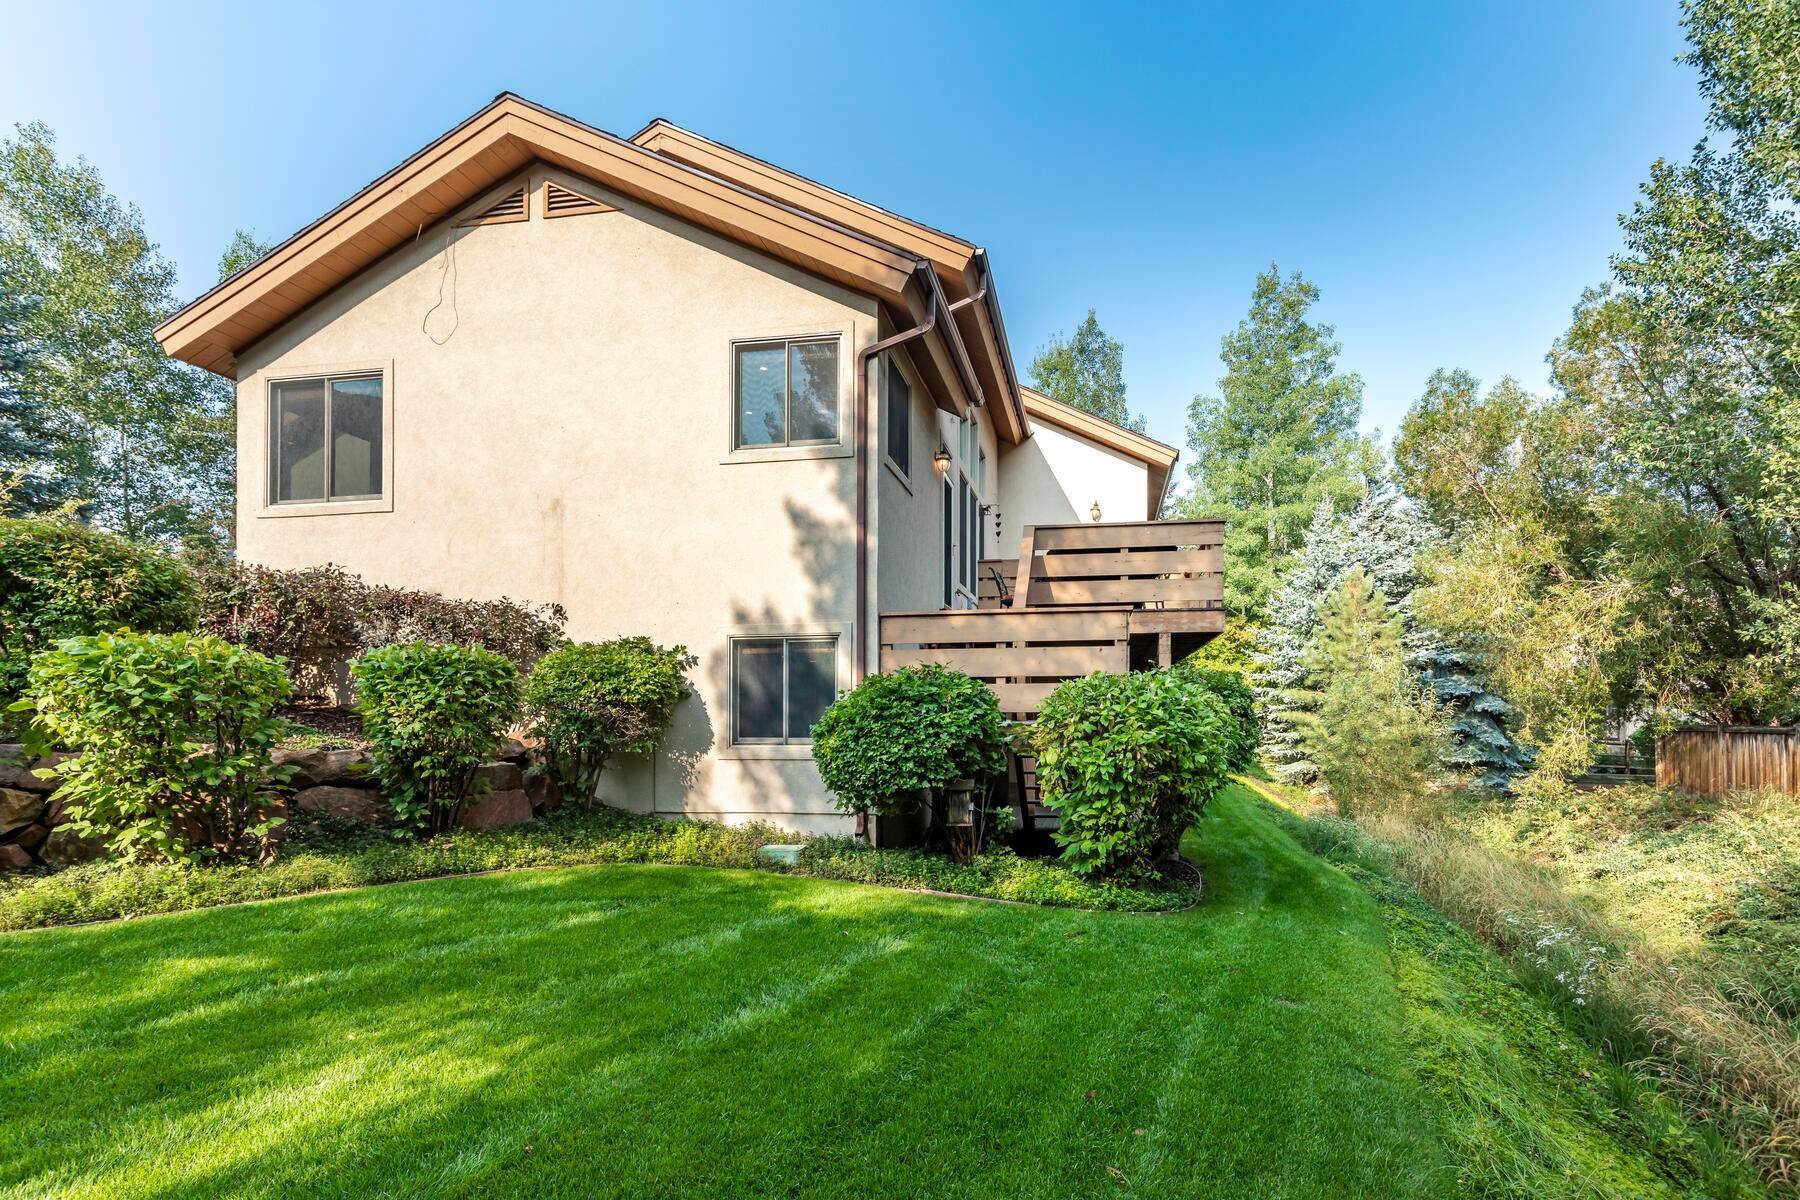 44. Single Family Homes for Sale at Spacious home in one of Park City's best neighborhoods on a quiet cul de sac wit 1642 Northshore Ct Park City, Utah 84098 United States